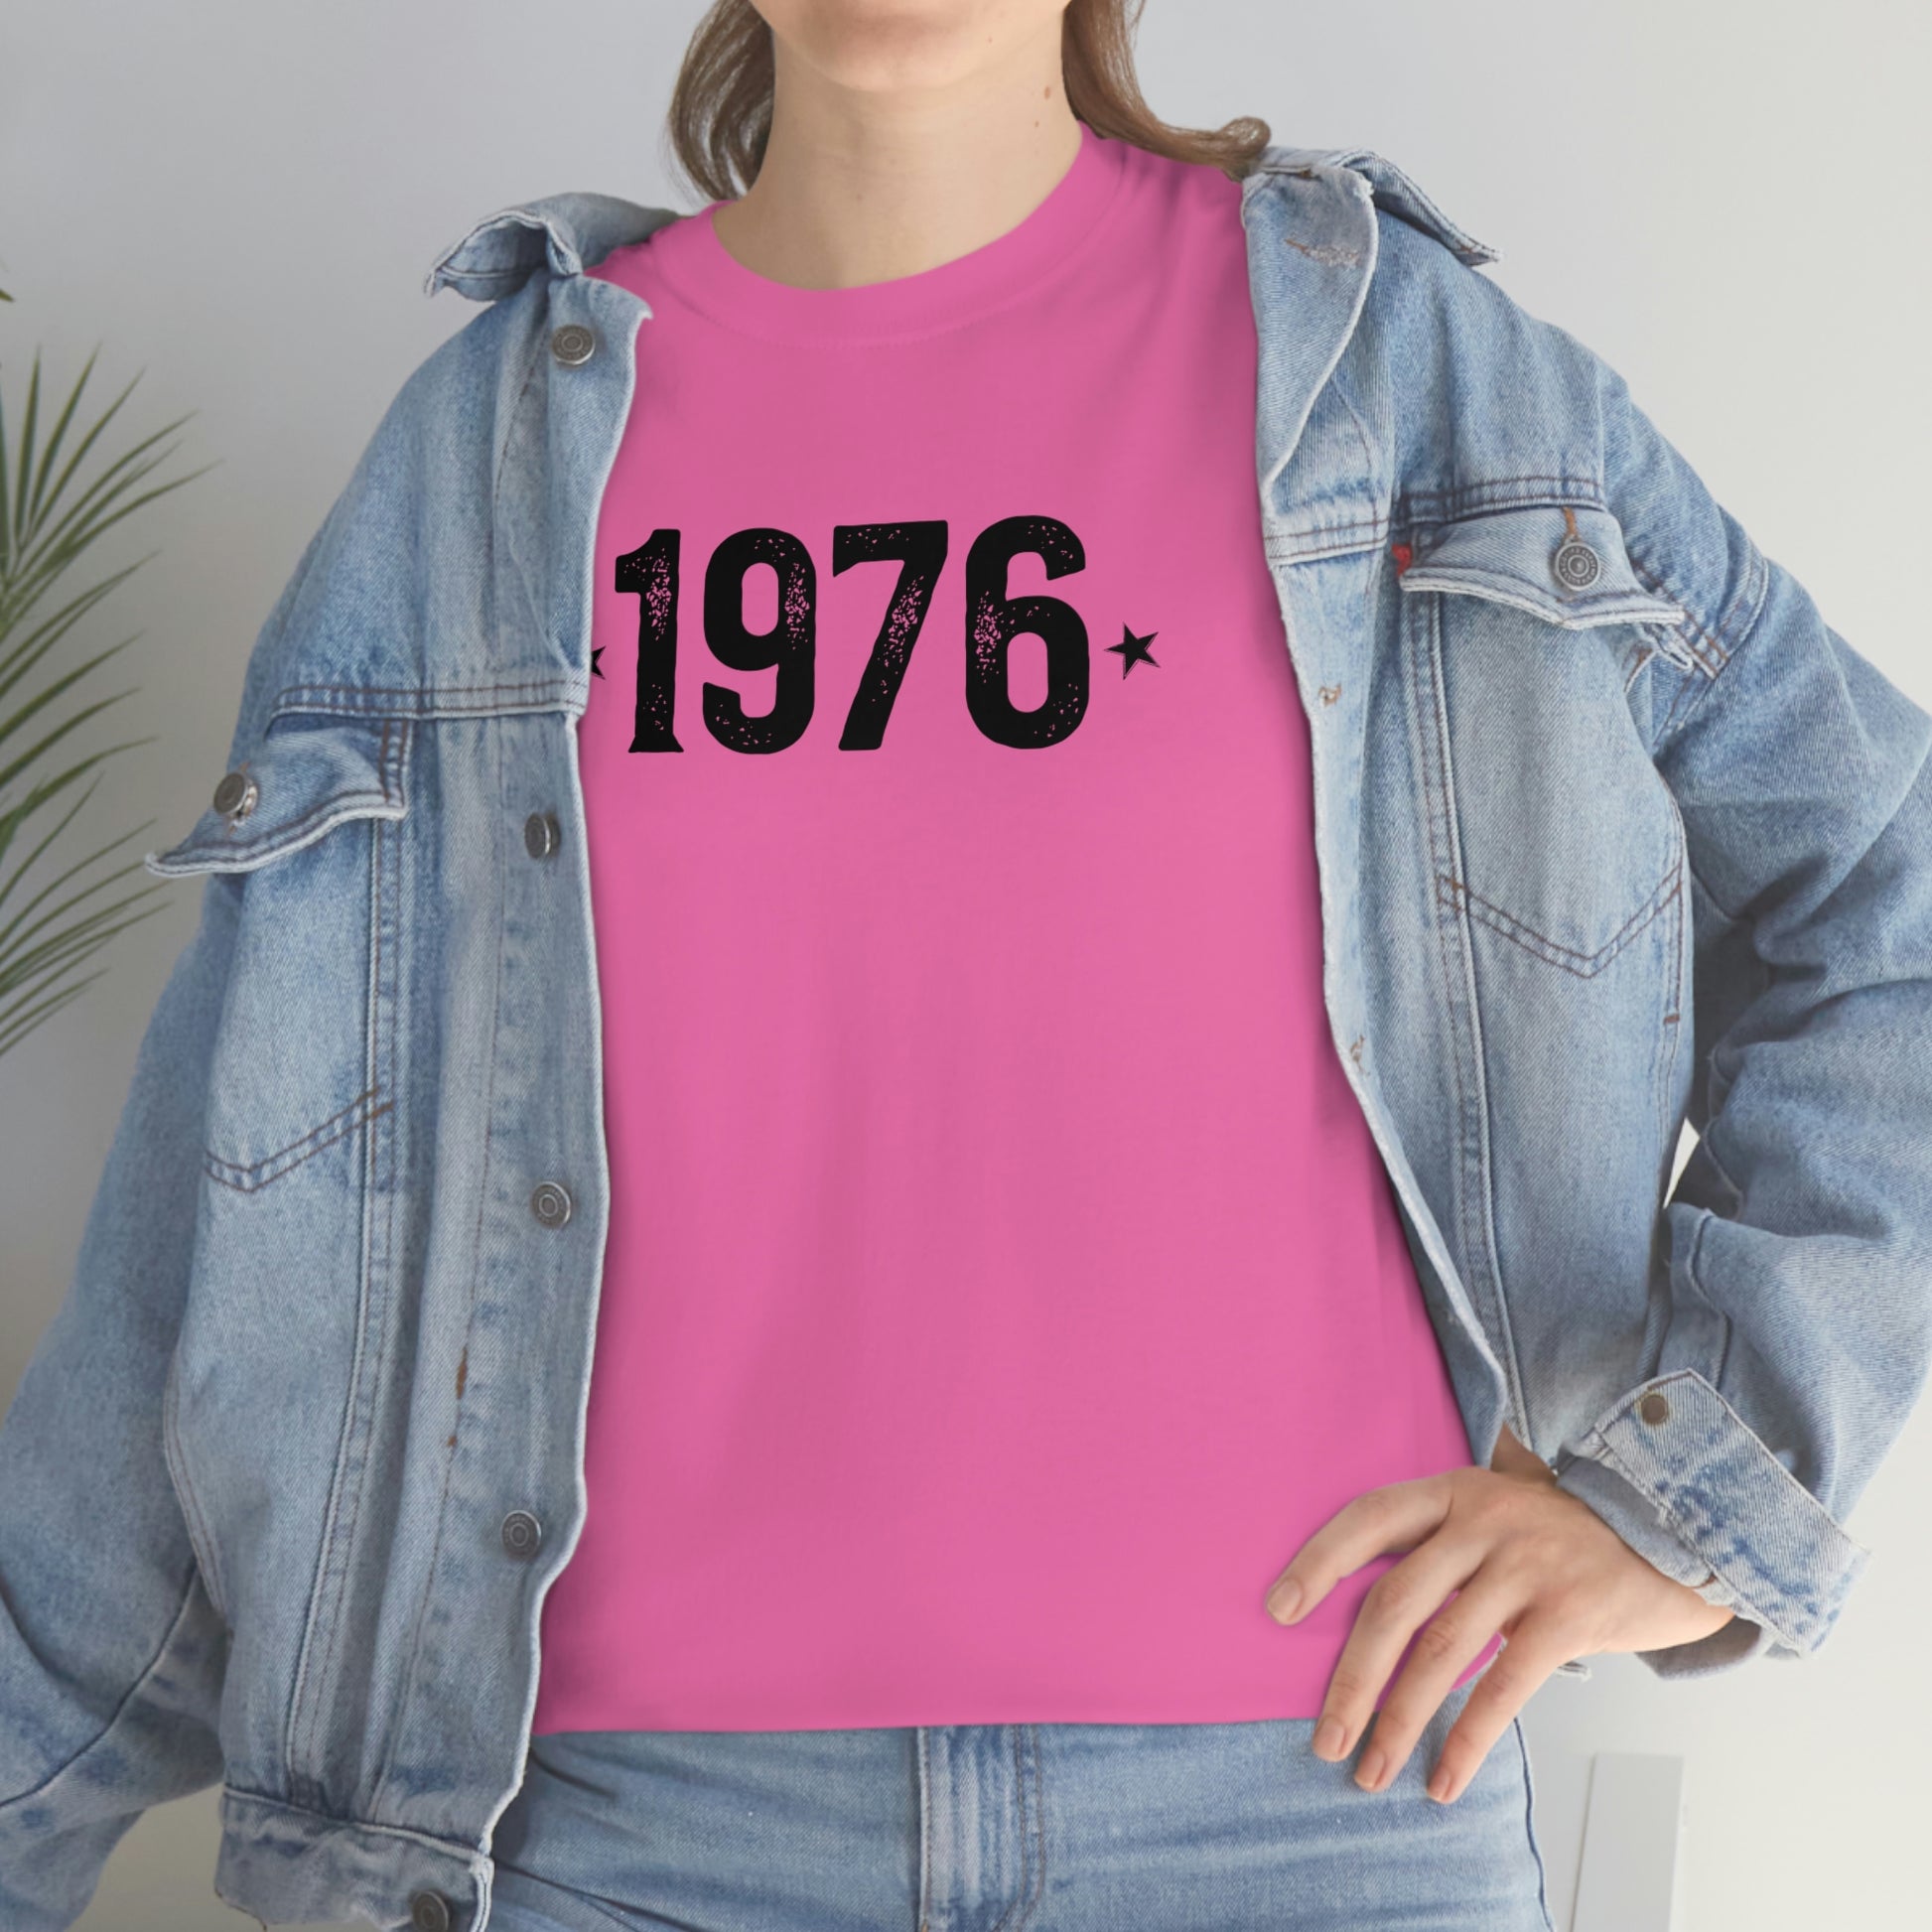 "1976 Birthday Year" T-Shirt - Weave Got Gifts - Unique Gifts You Won’t Find Anywhere Else!